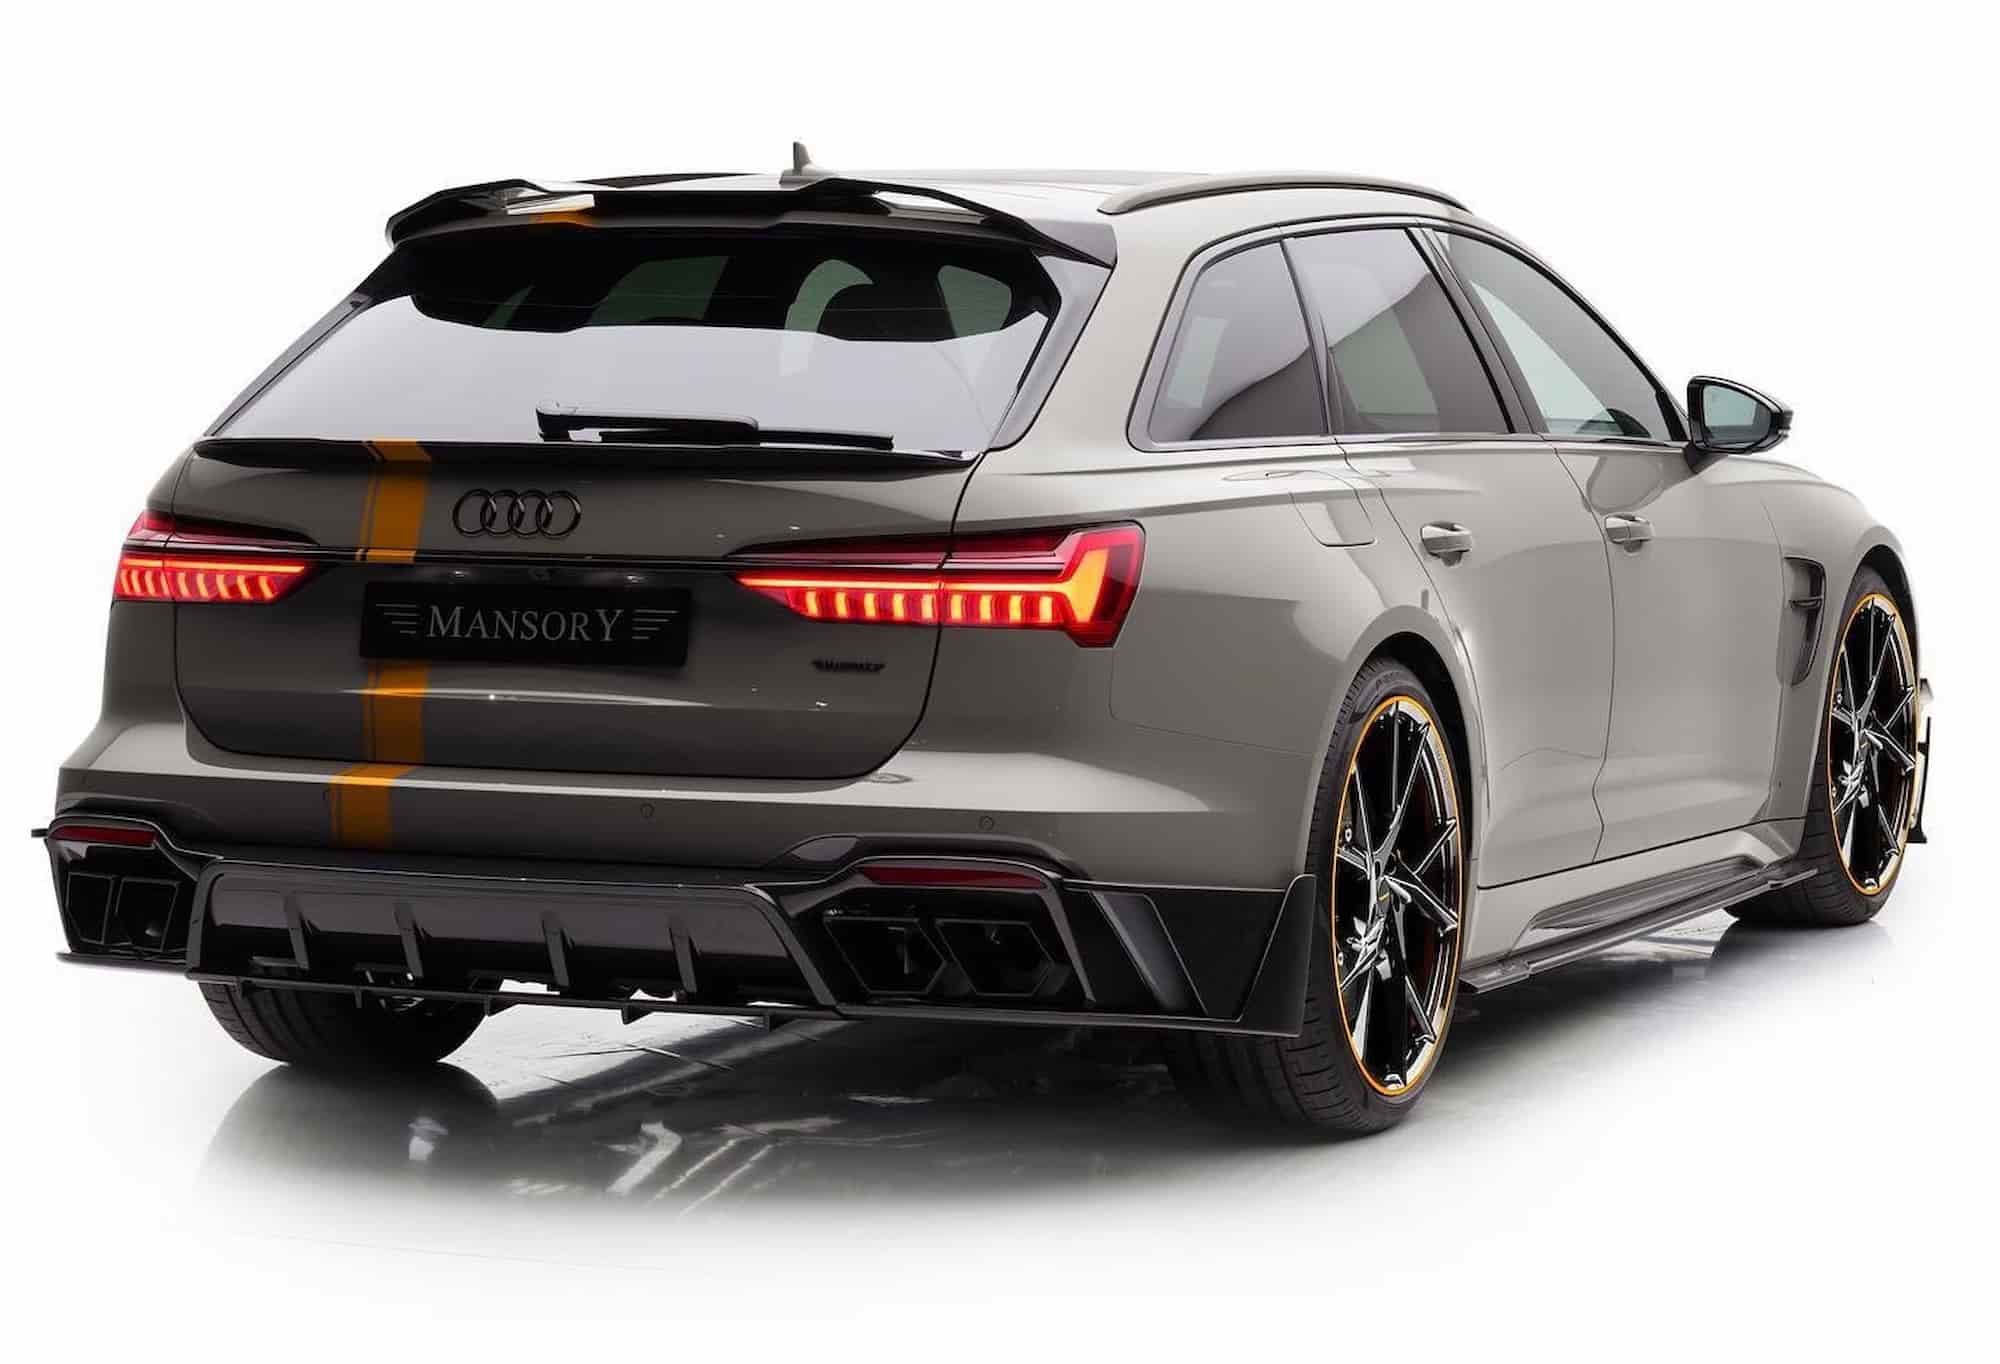 tuned audi rs 6 is more powerful than the mclaren 720s quicker than the ferrari enzo 3